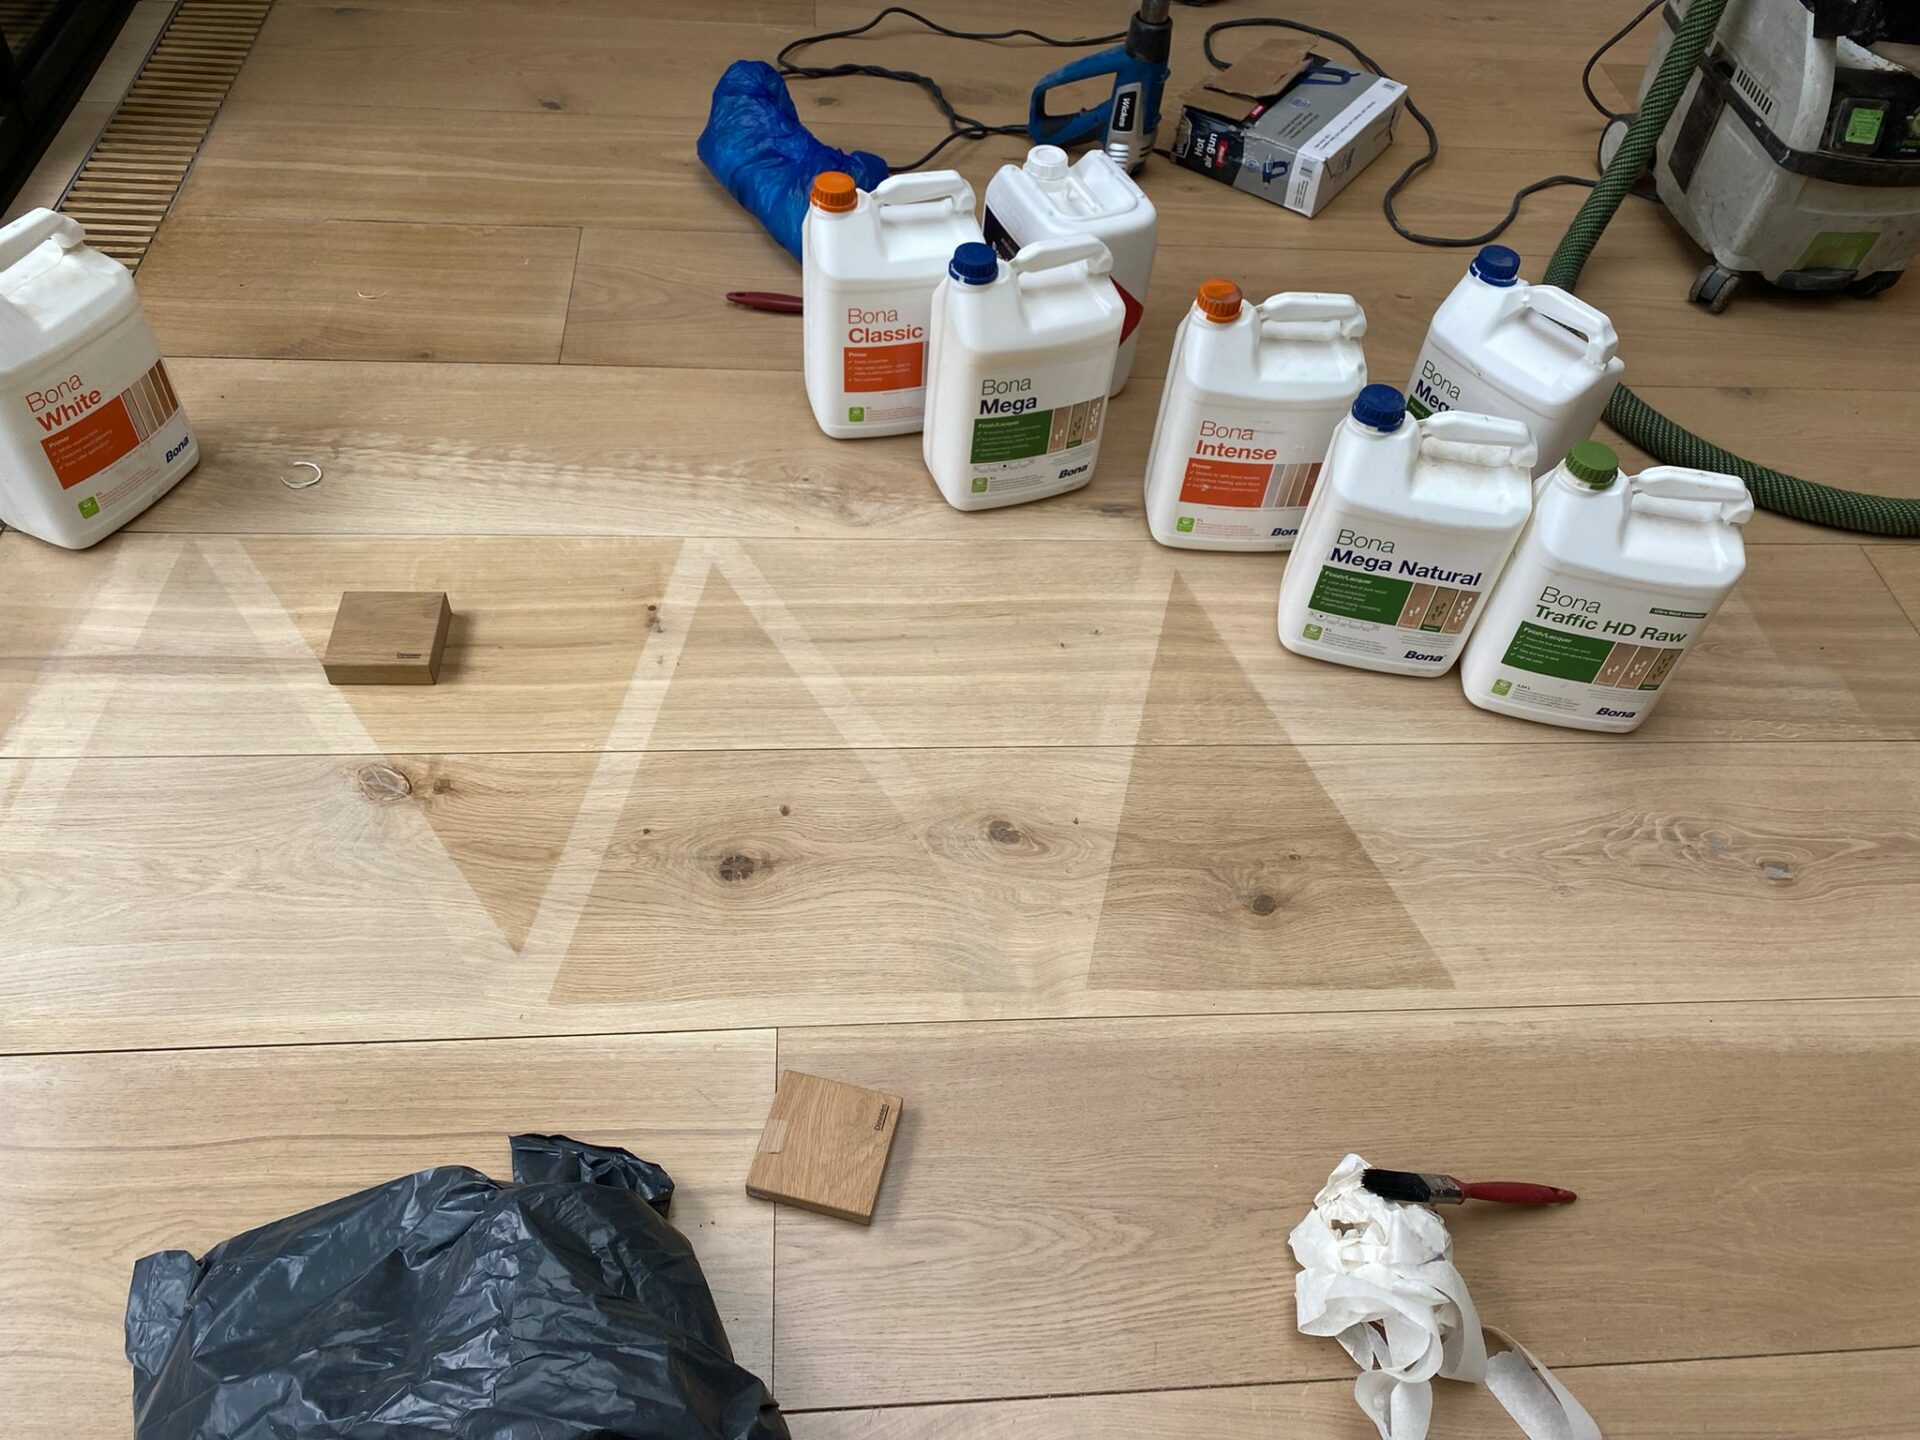 Wooden Floor Finishes